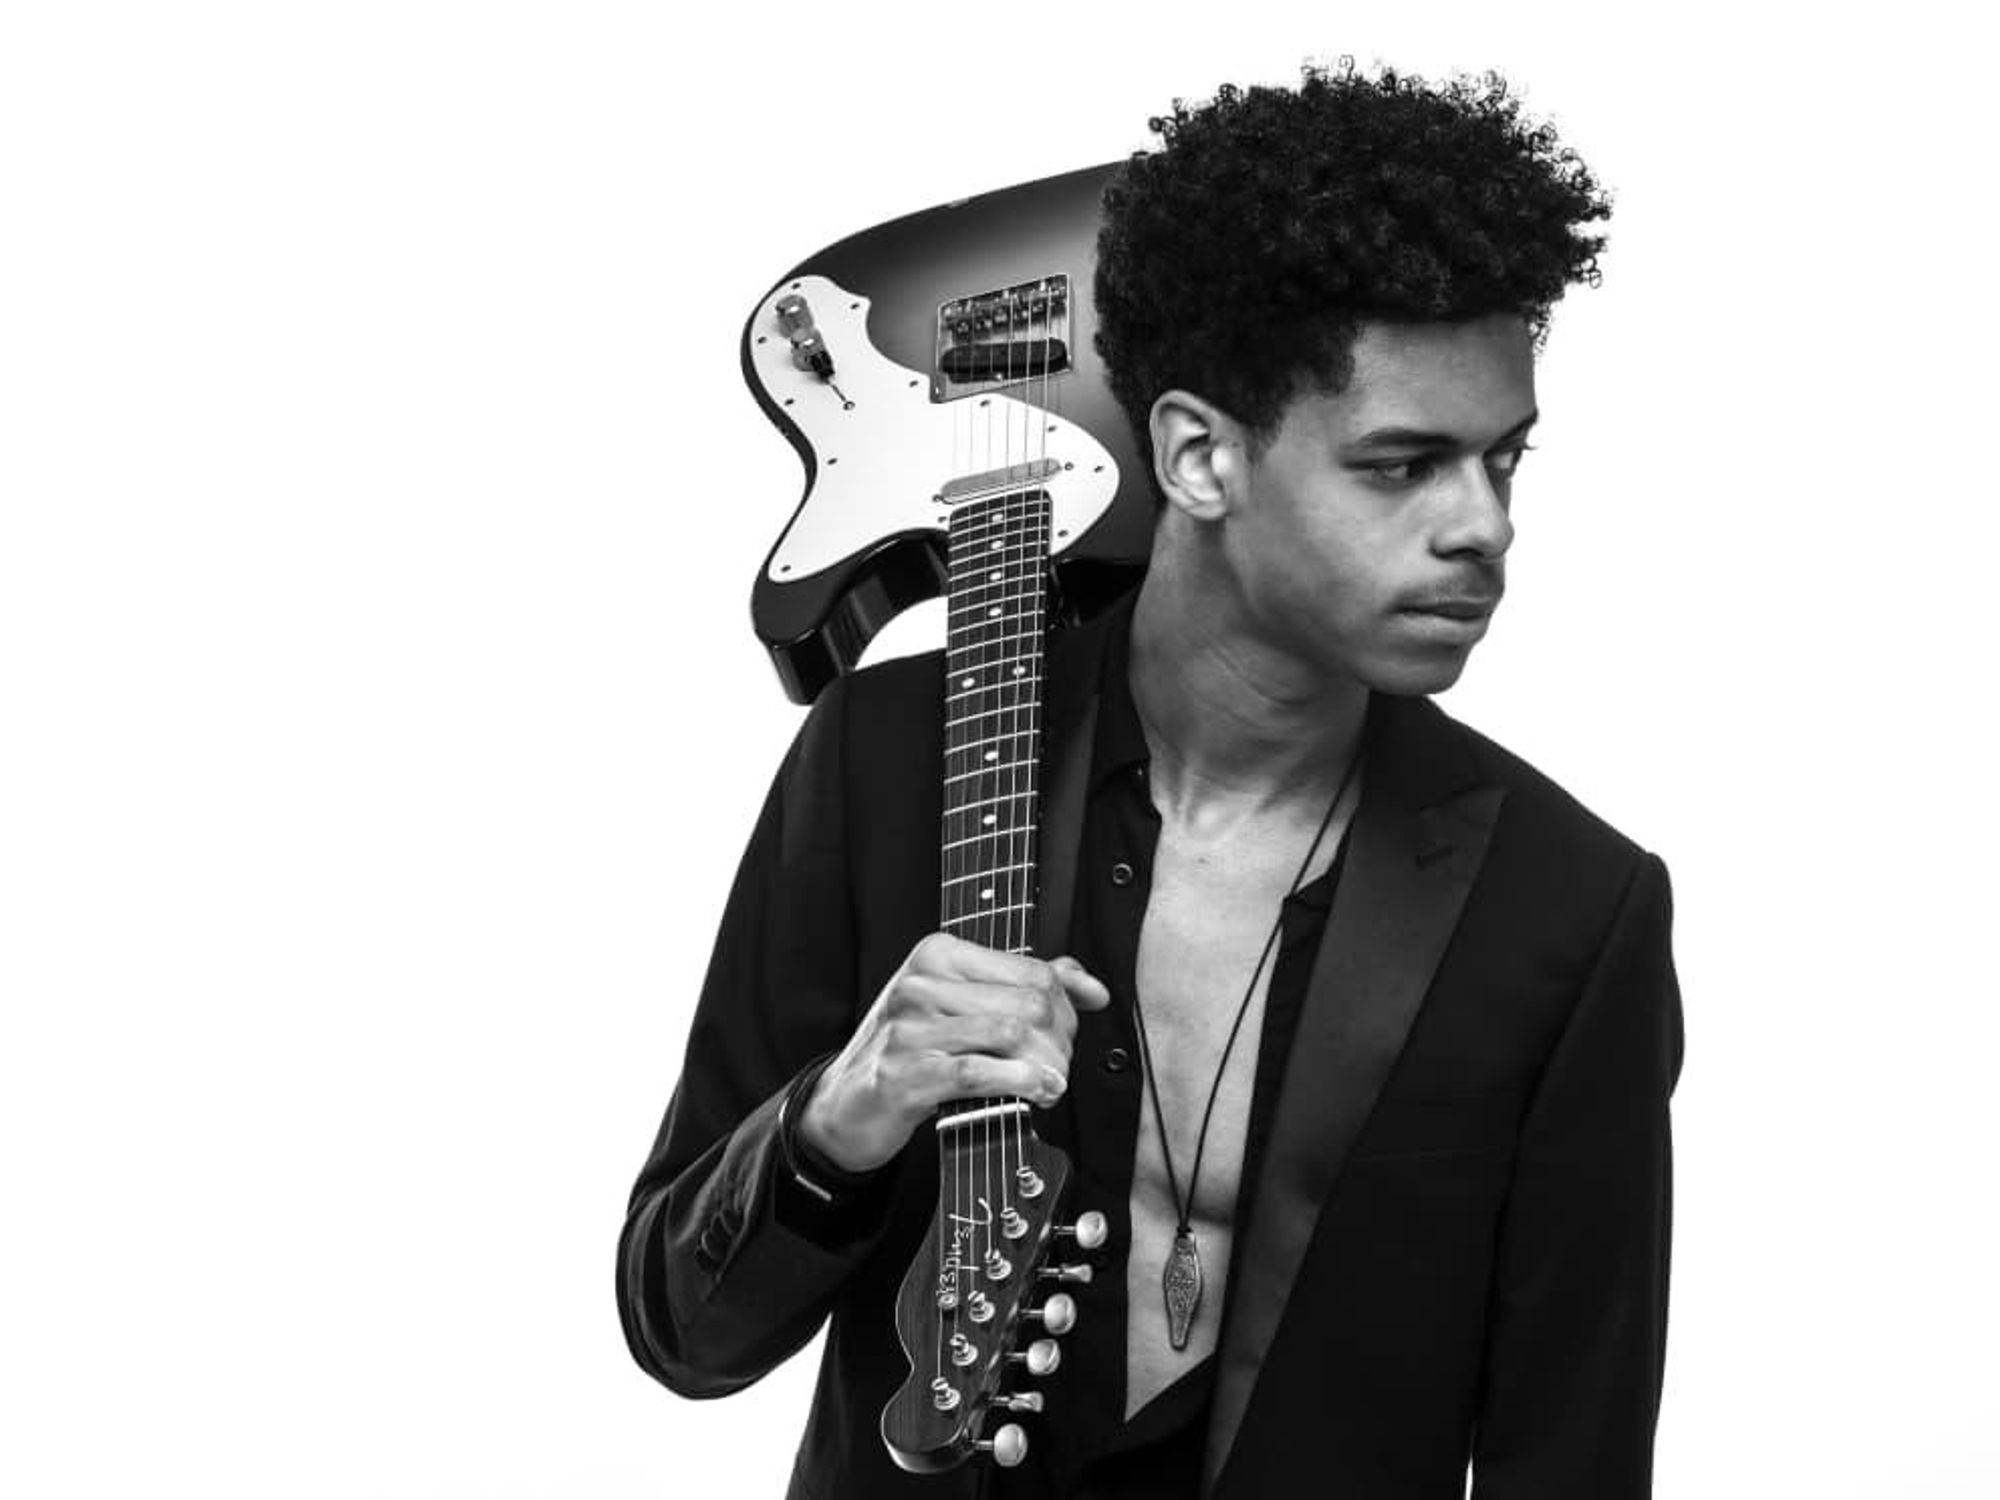 Zach Person poses with an electric guitar over his shoulder, in a tuxedo jacket with an unbuttoned shirt.